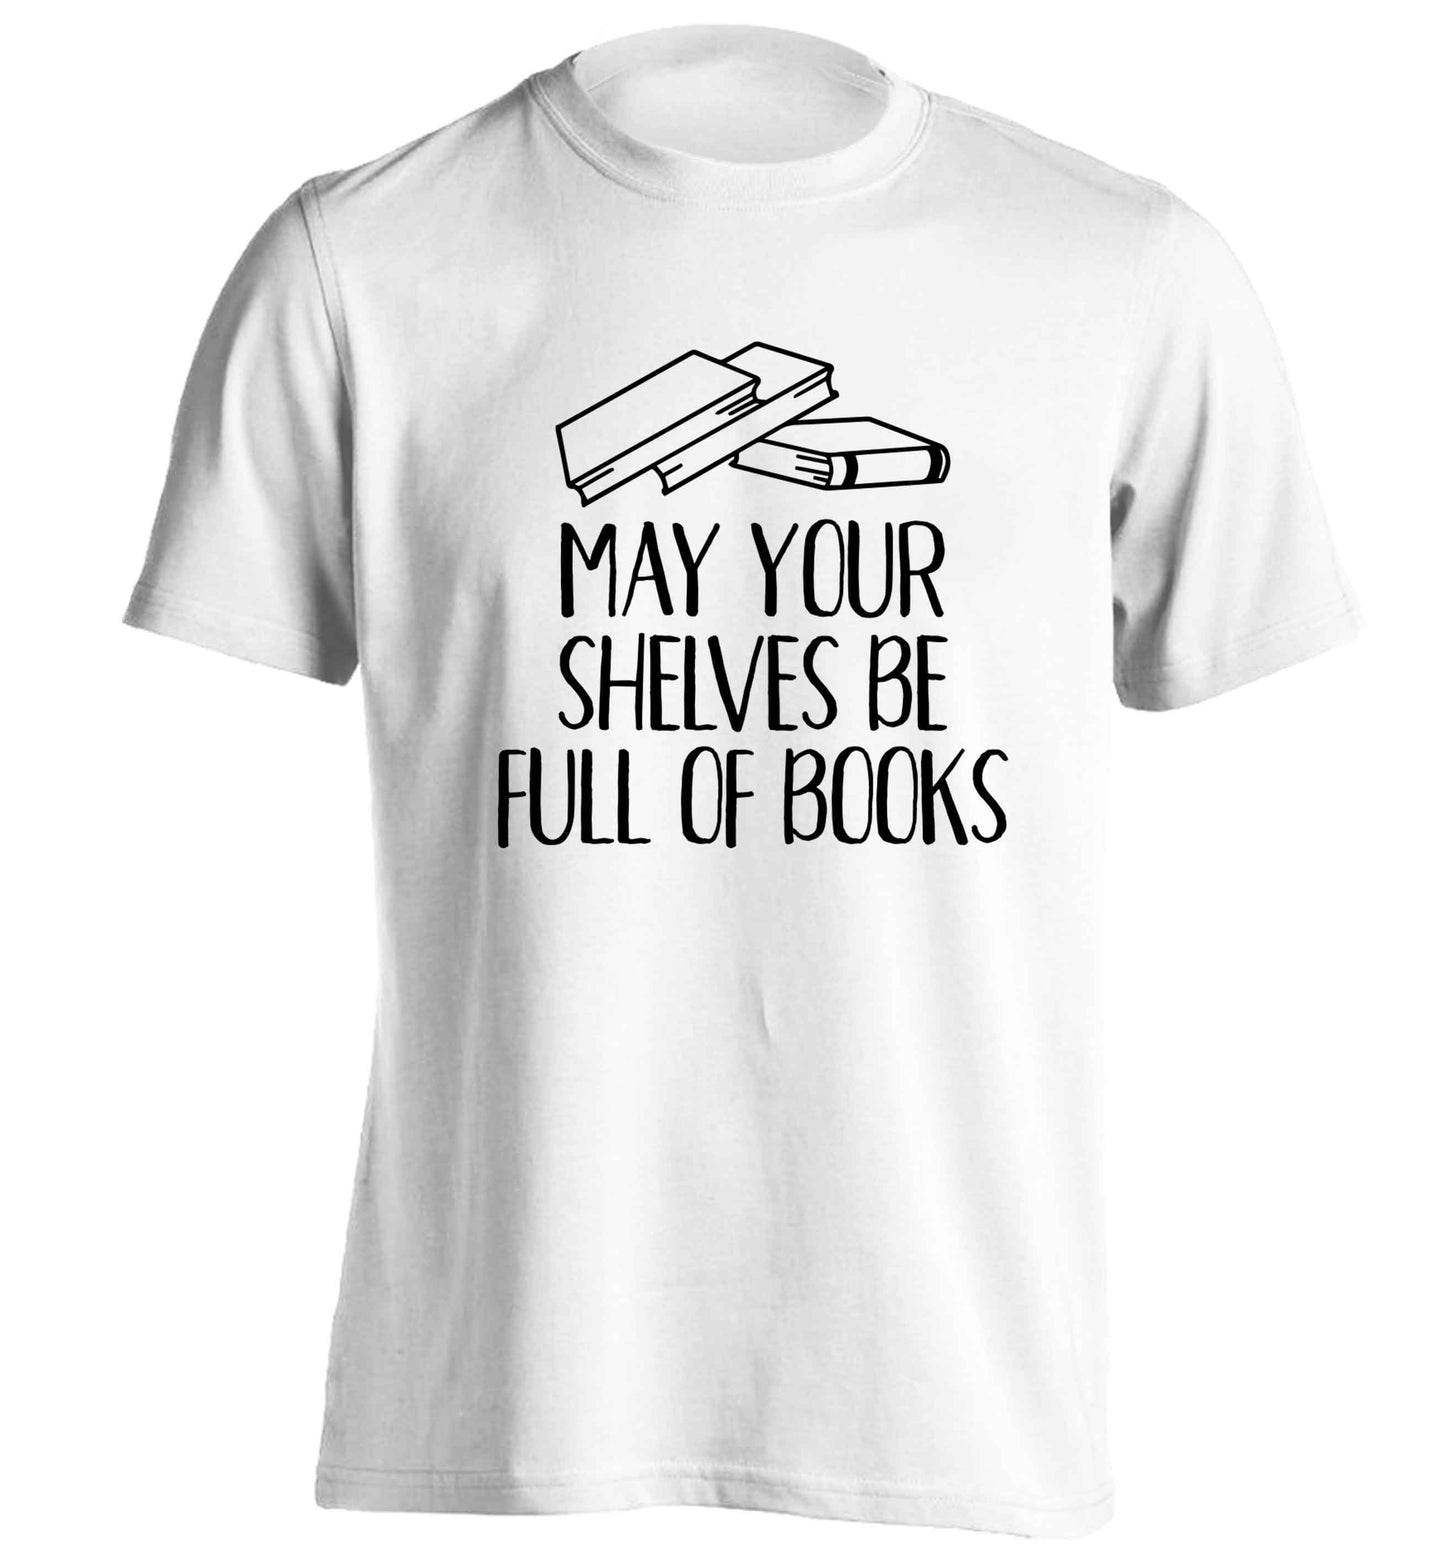 May your shelves be full of books adults unisex white Tshirt 2XL